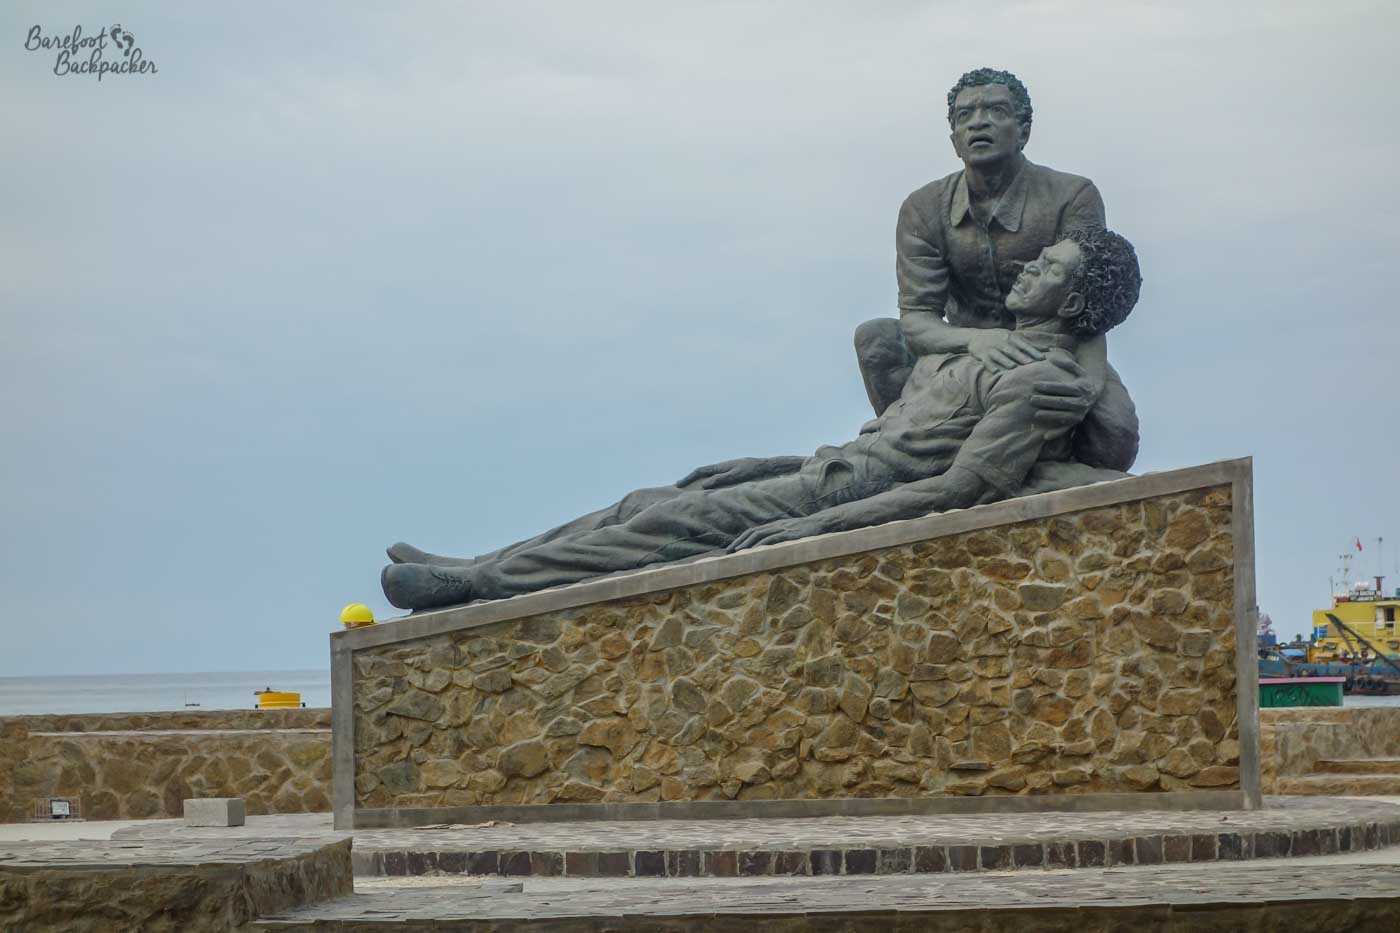 On a stone plinth is a statue of two men. One is lying down, presumably dying. The other is crouched behind them, cradling the dying man's head in their hands, and looking sadly out into the distance.